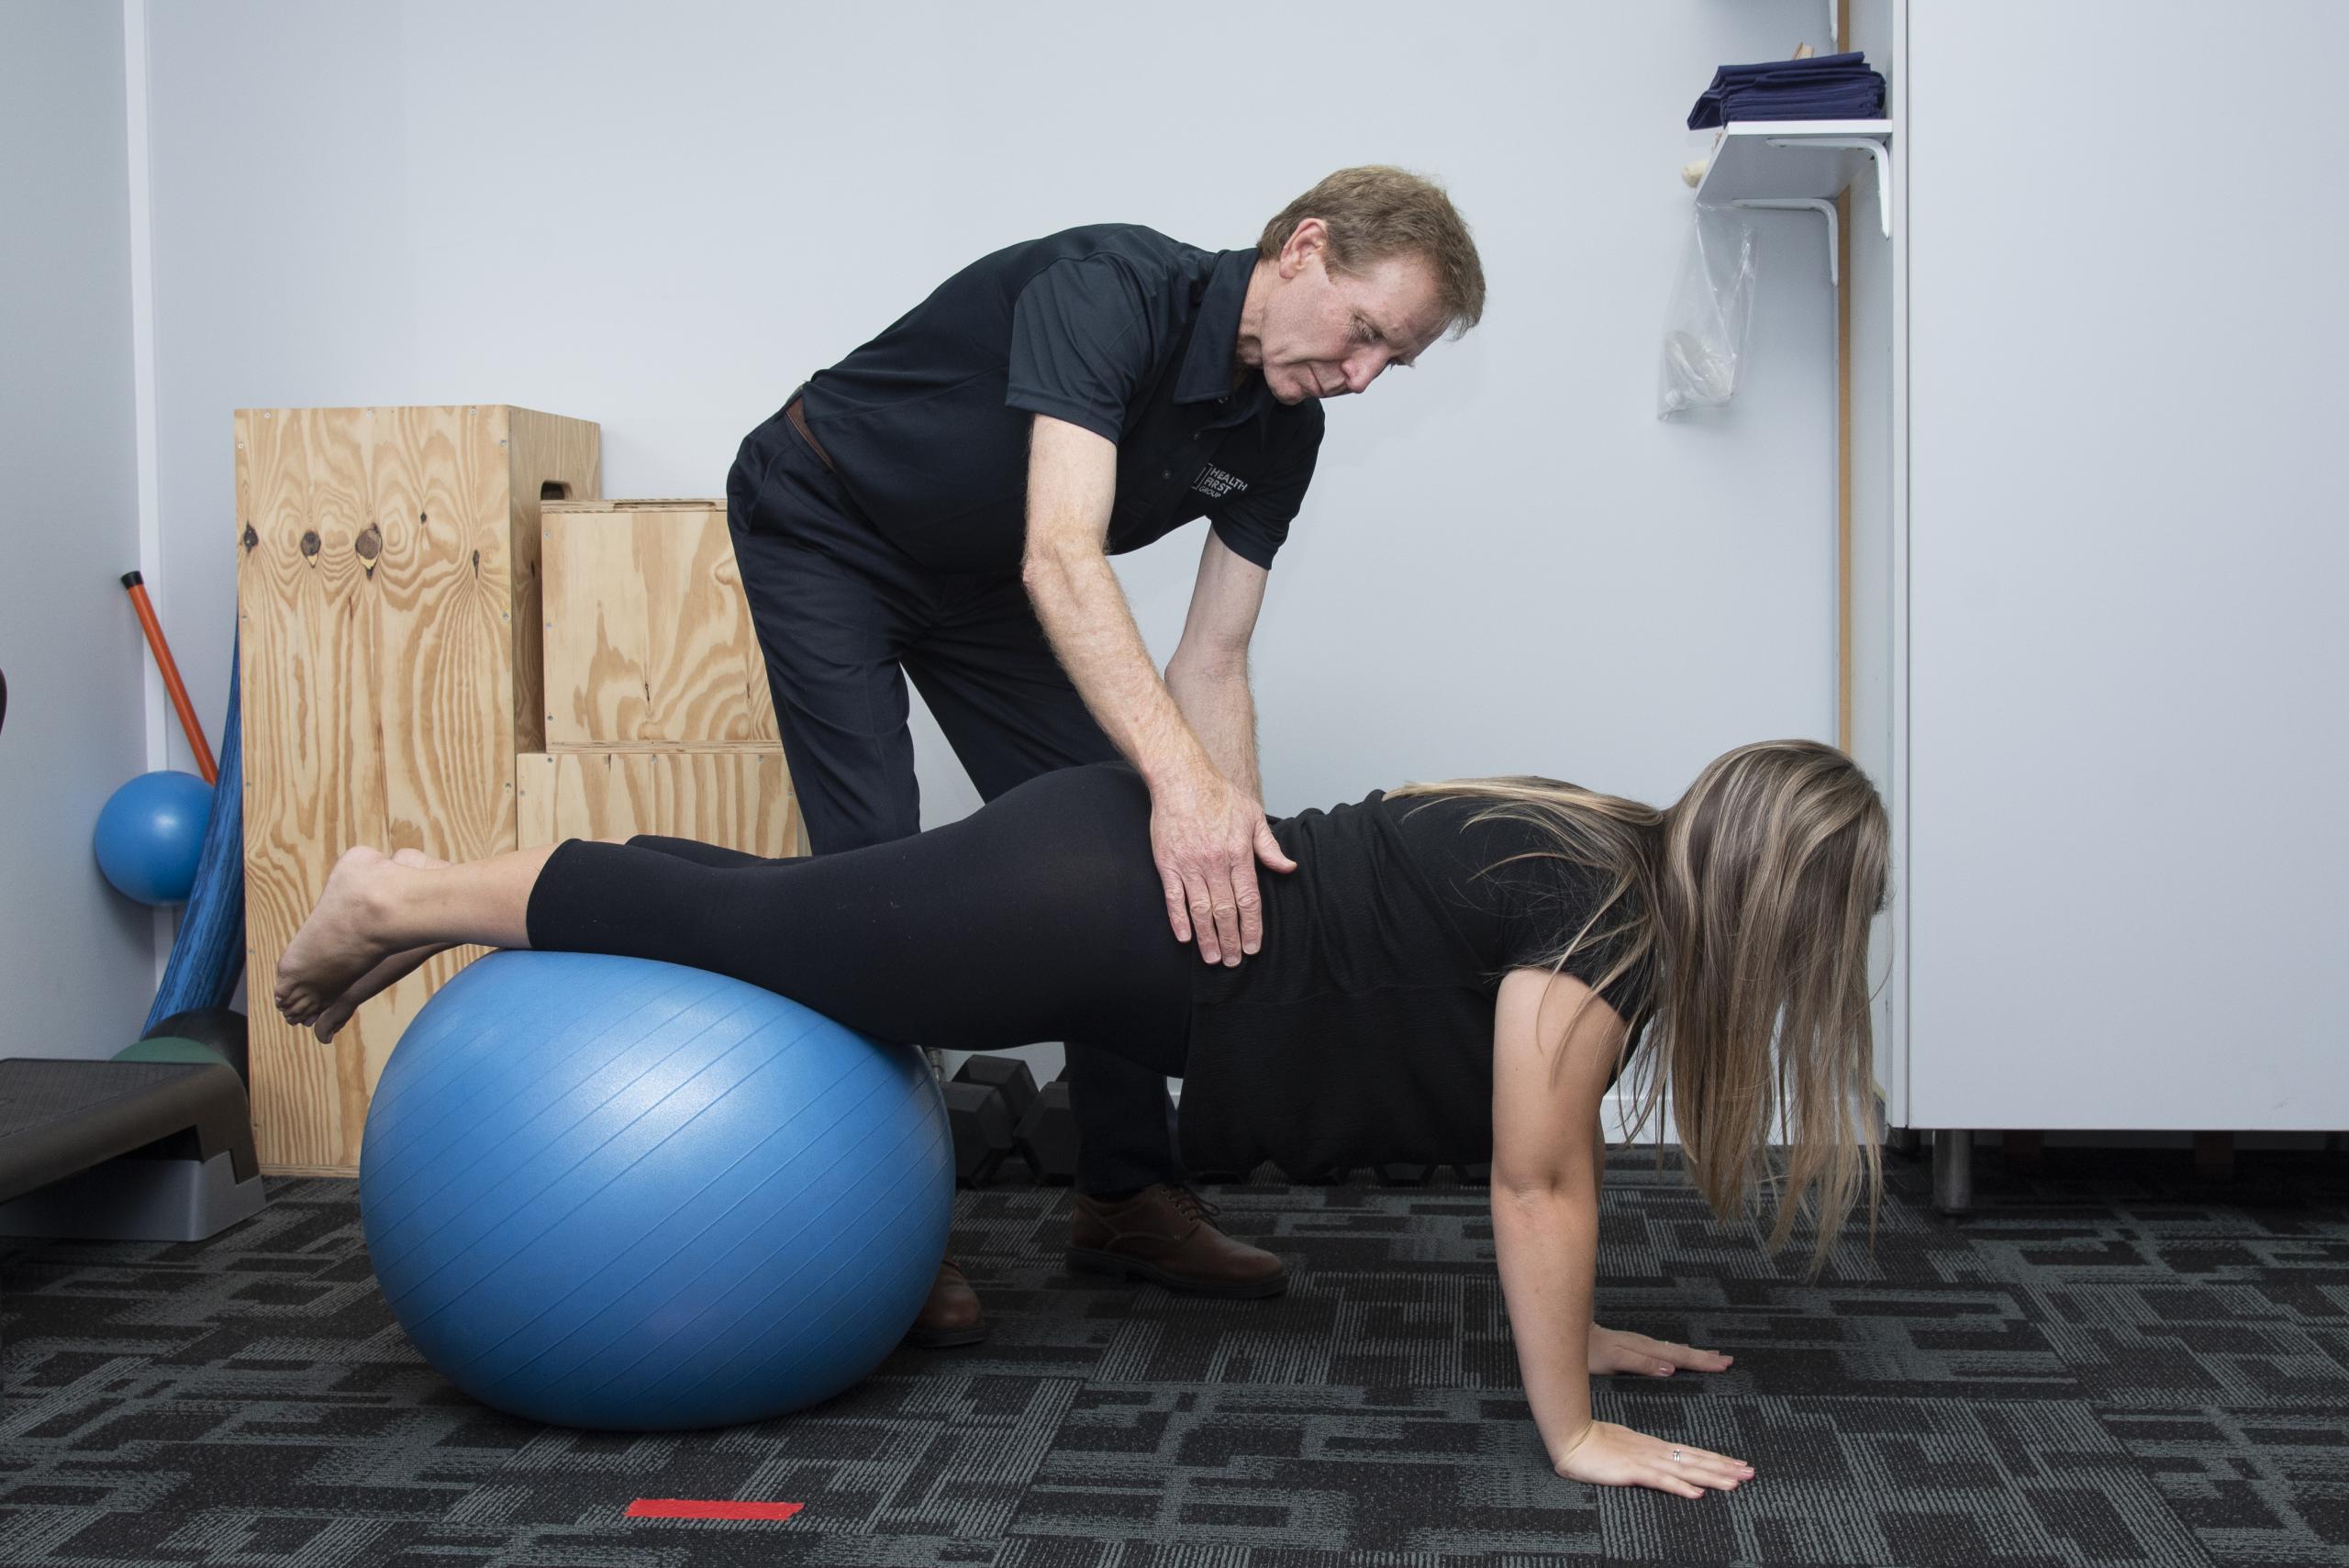 Girl on exercise ball with an Exercise Physiologist